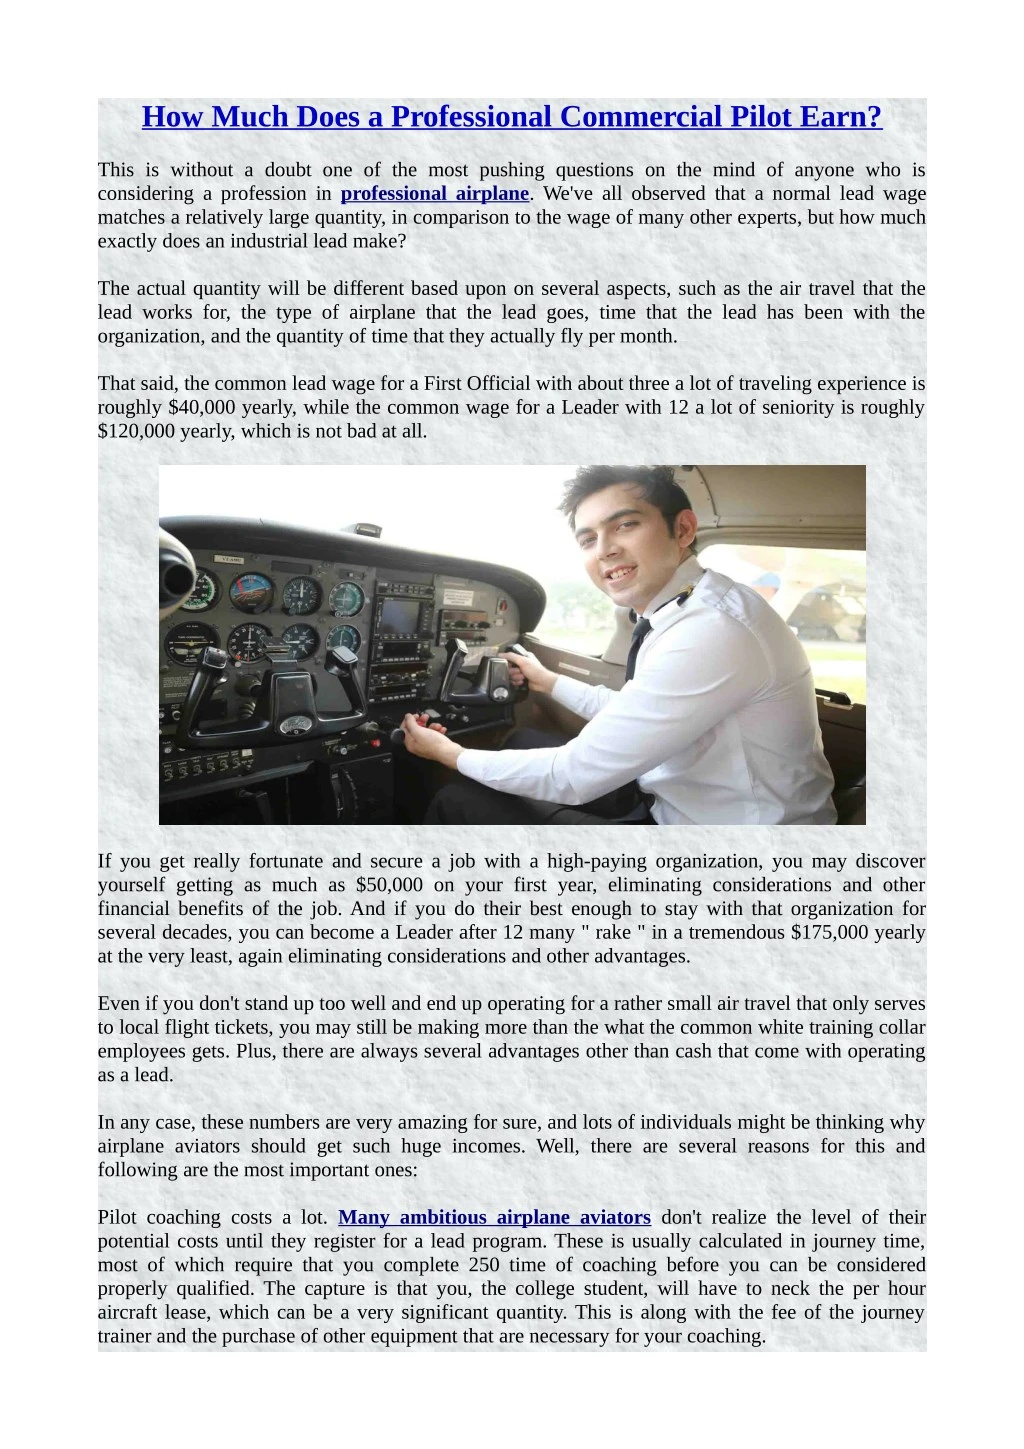 how much does a professional commercial pilot earn